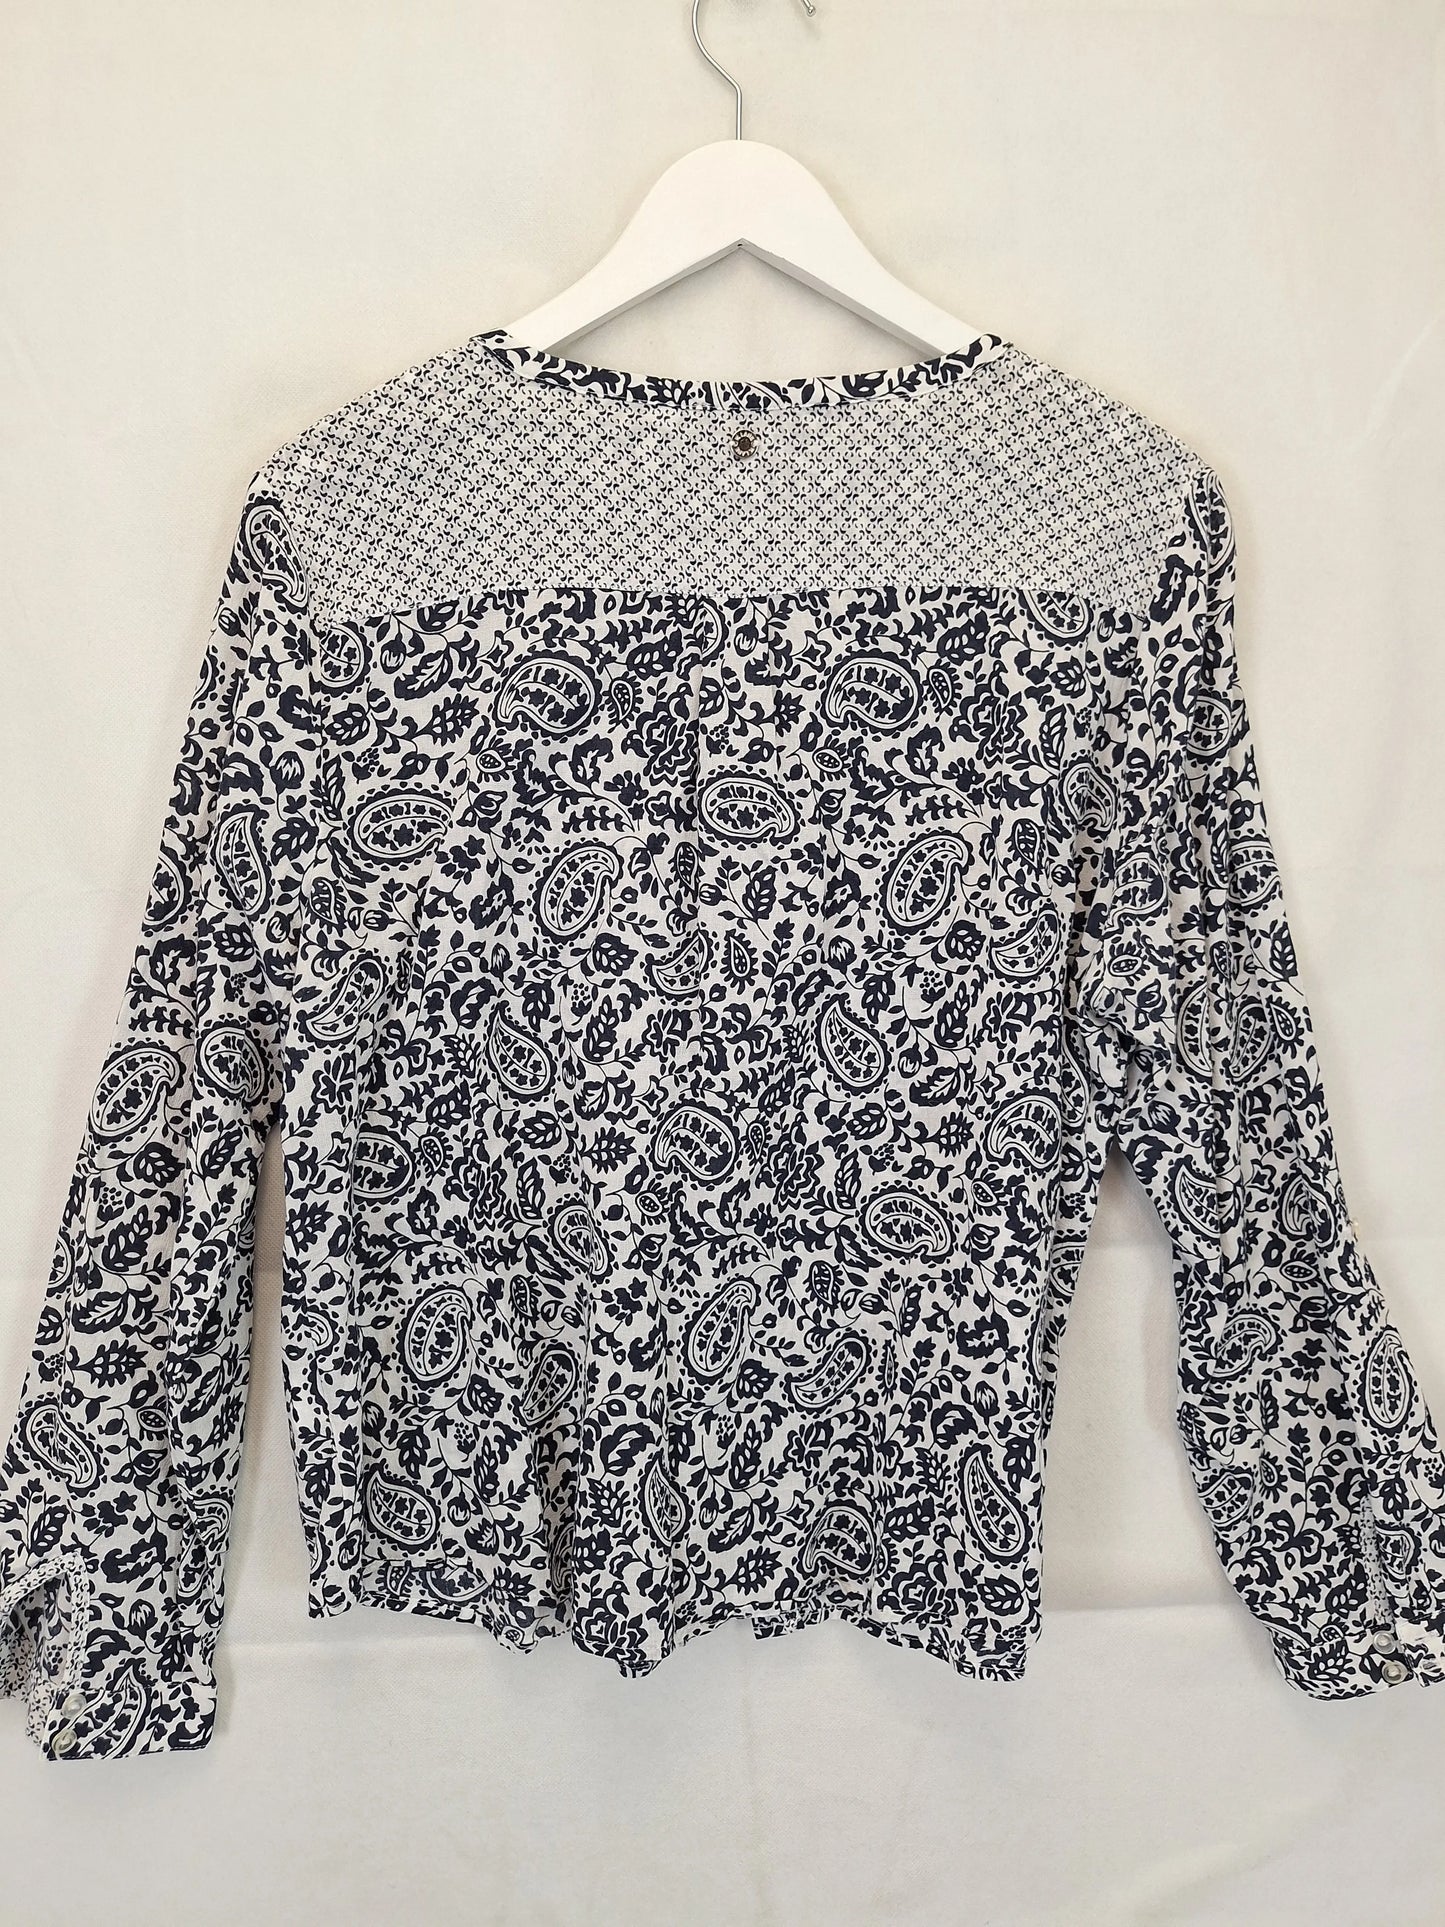 W. Lane Navy Contrast Light Fauna Blouse Size 16 by SwapUp-Online Second Hand Store-Online Thrift Store